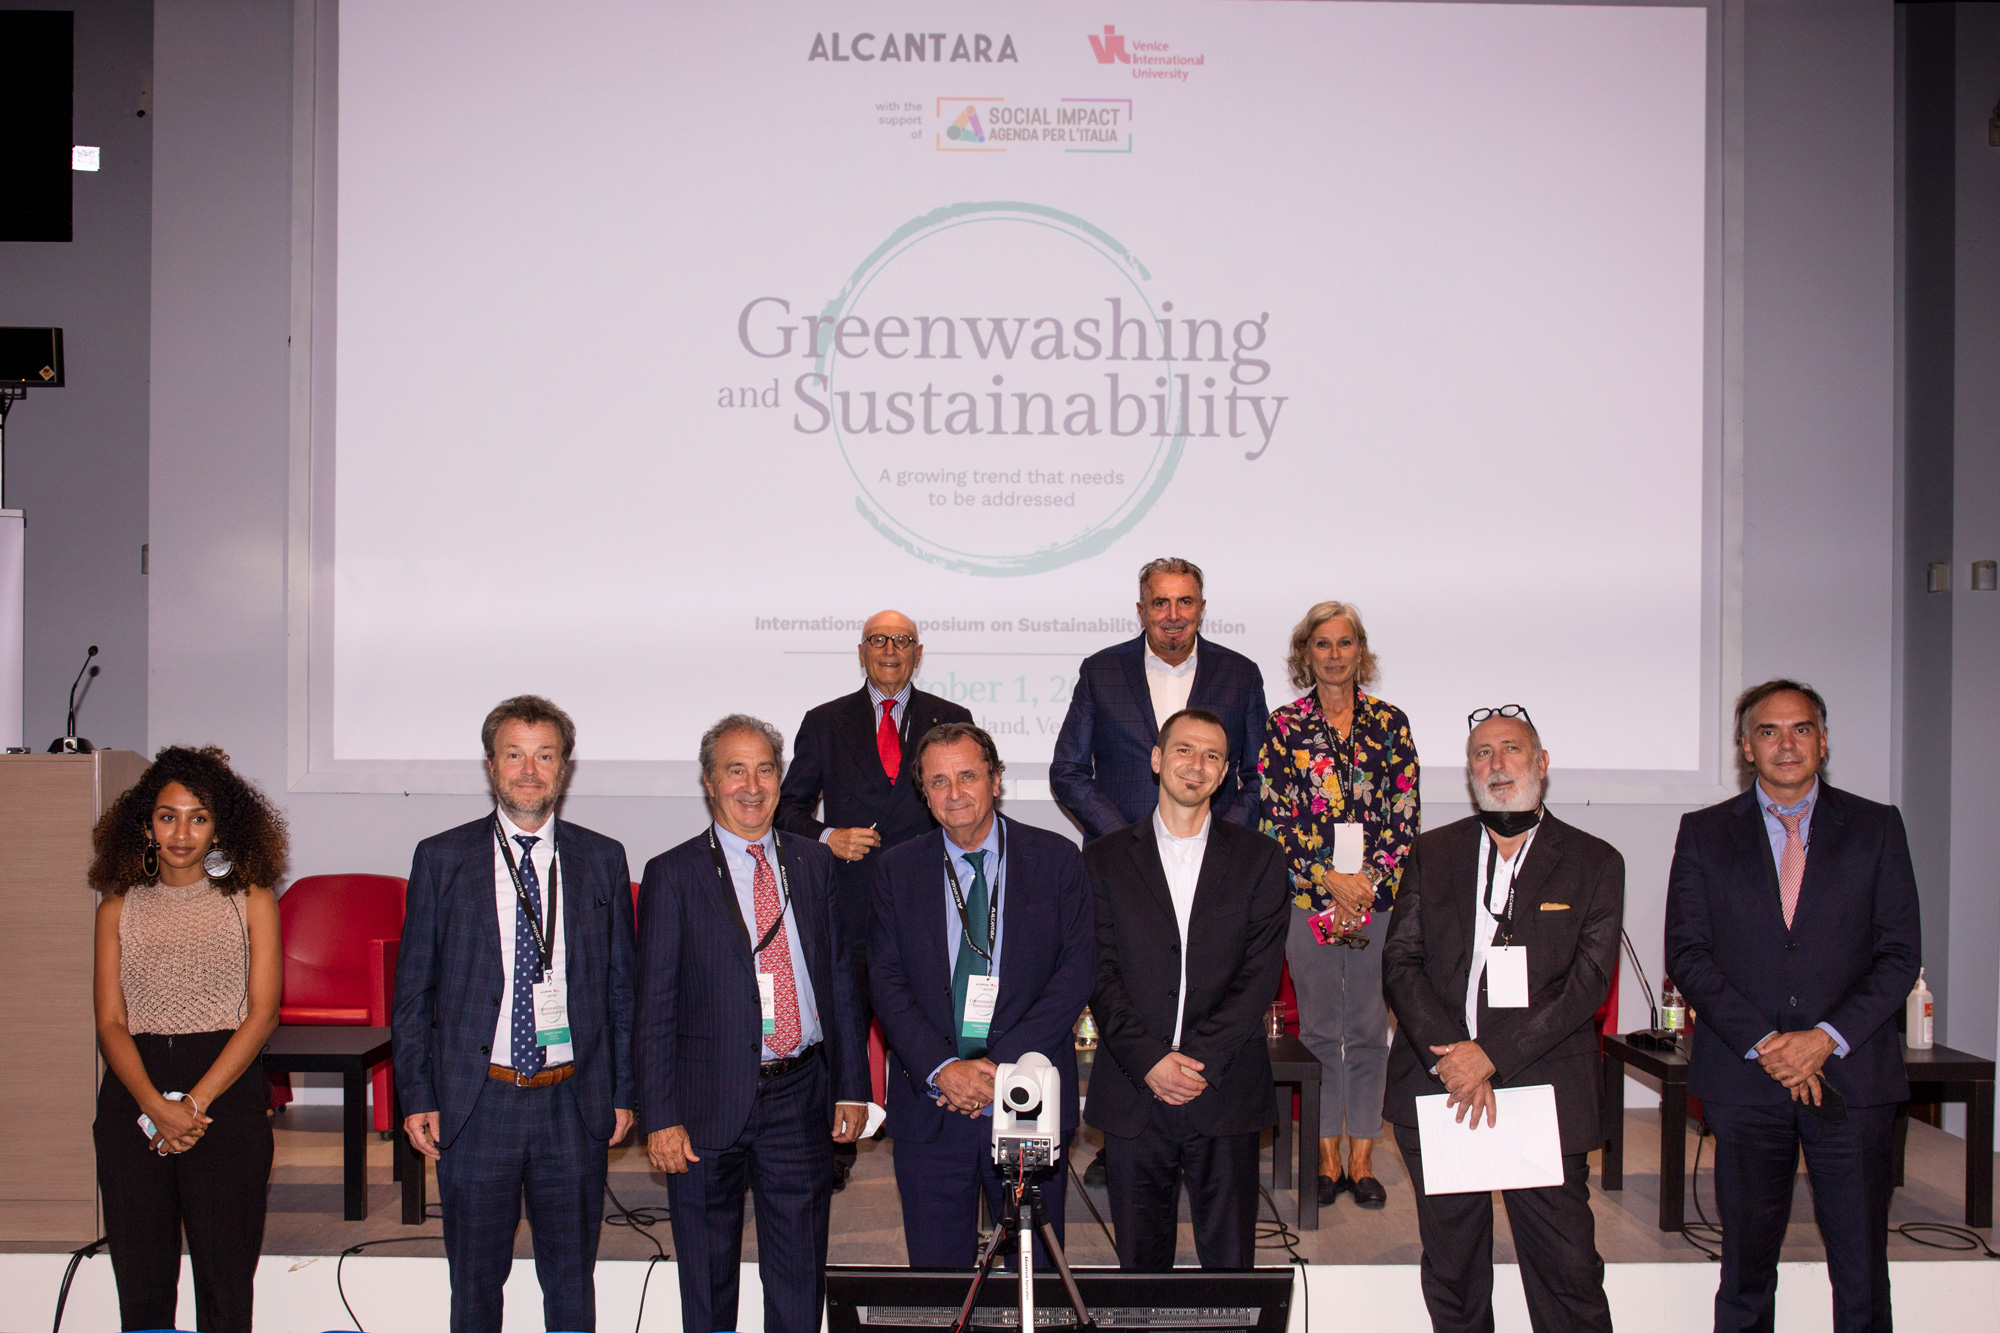 6^ Simposio Internazionale "Greenwashing and Sustainability: a growing trend that needs to be addressed"